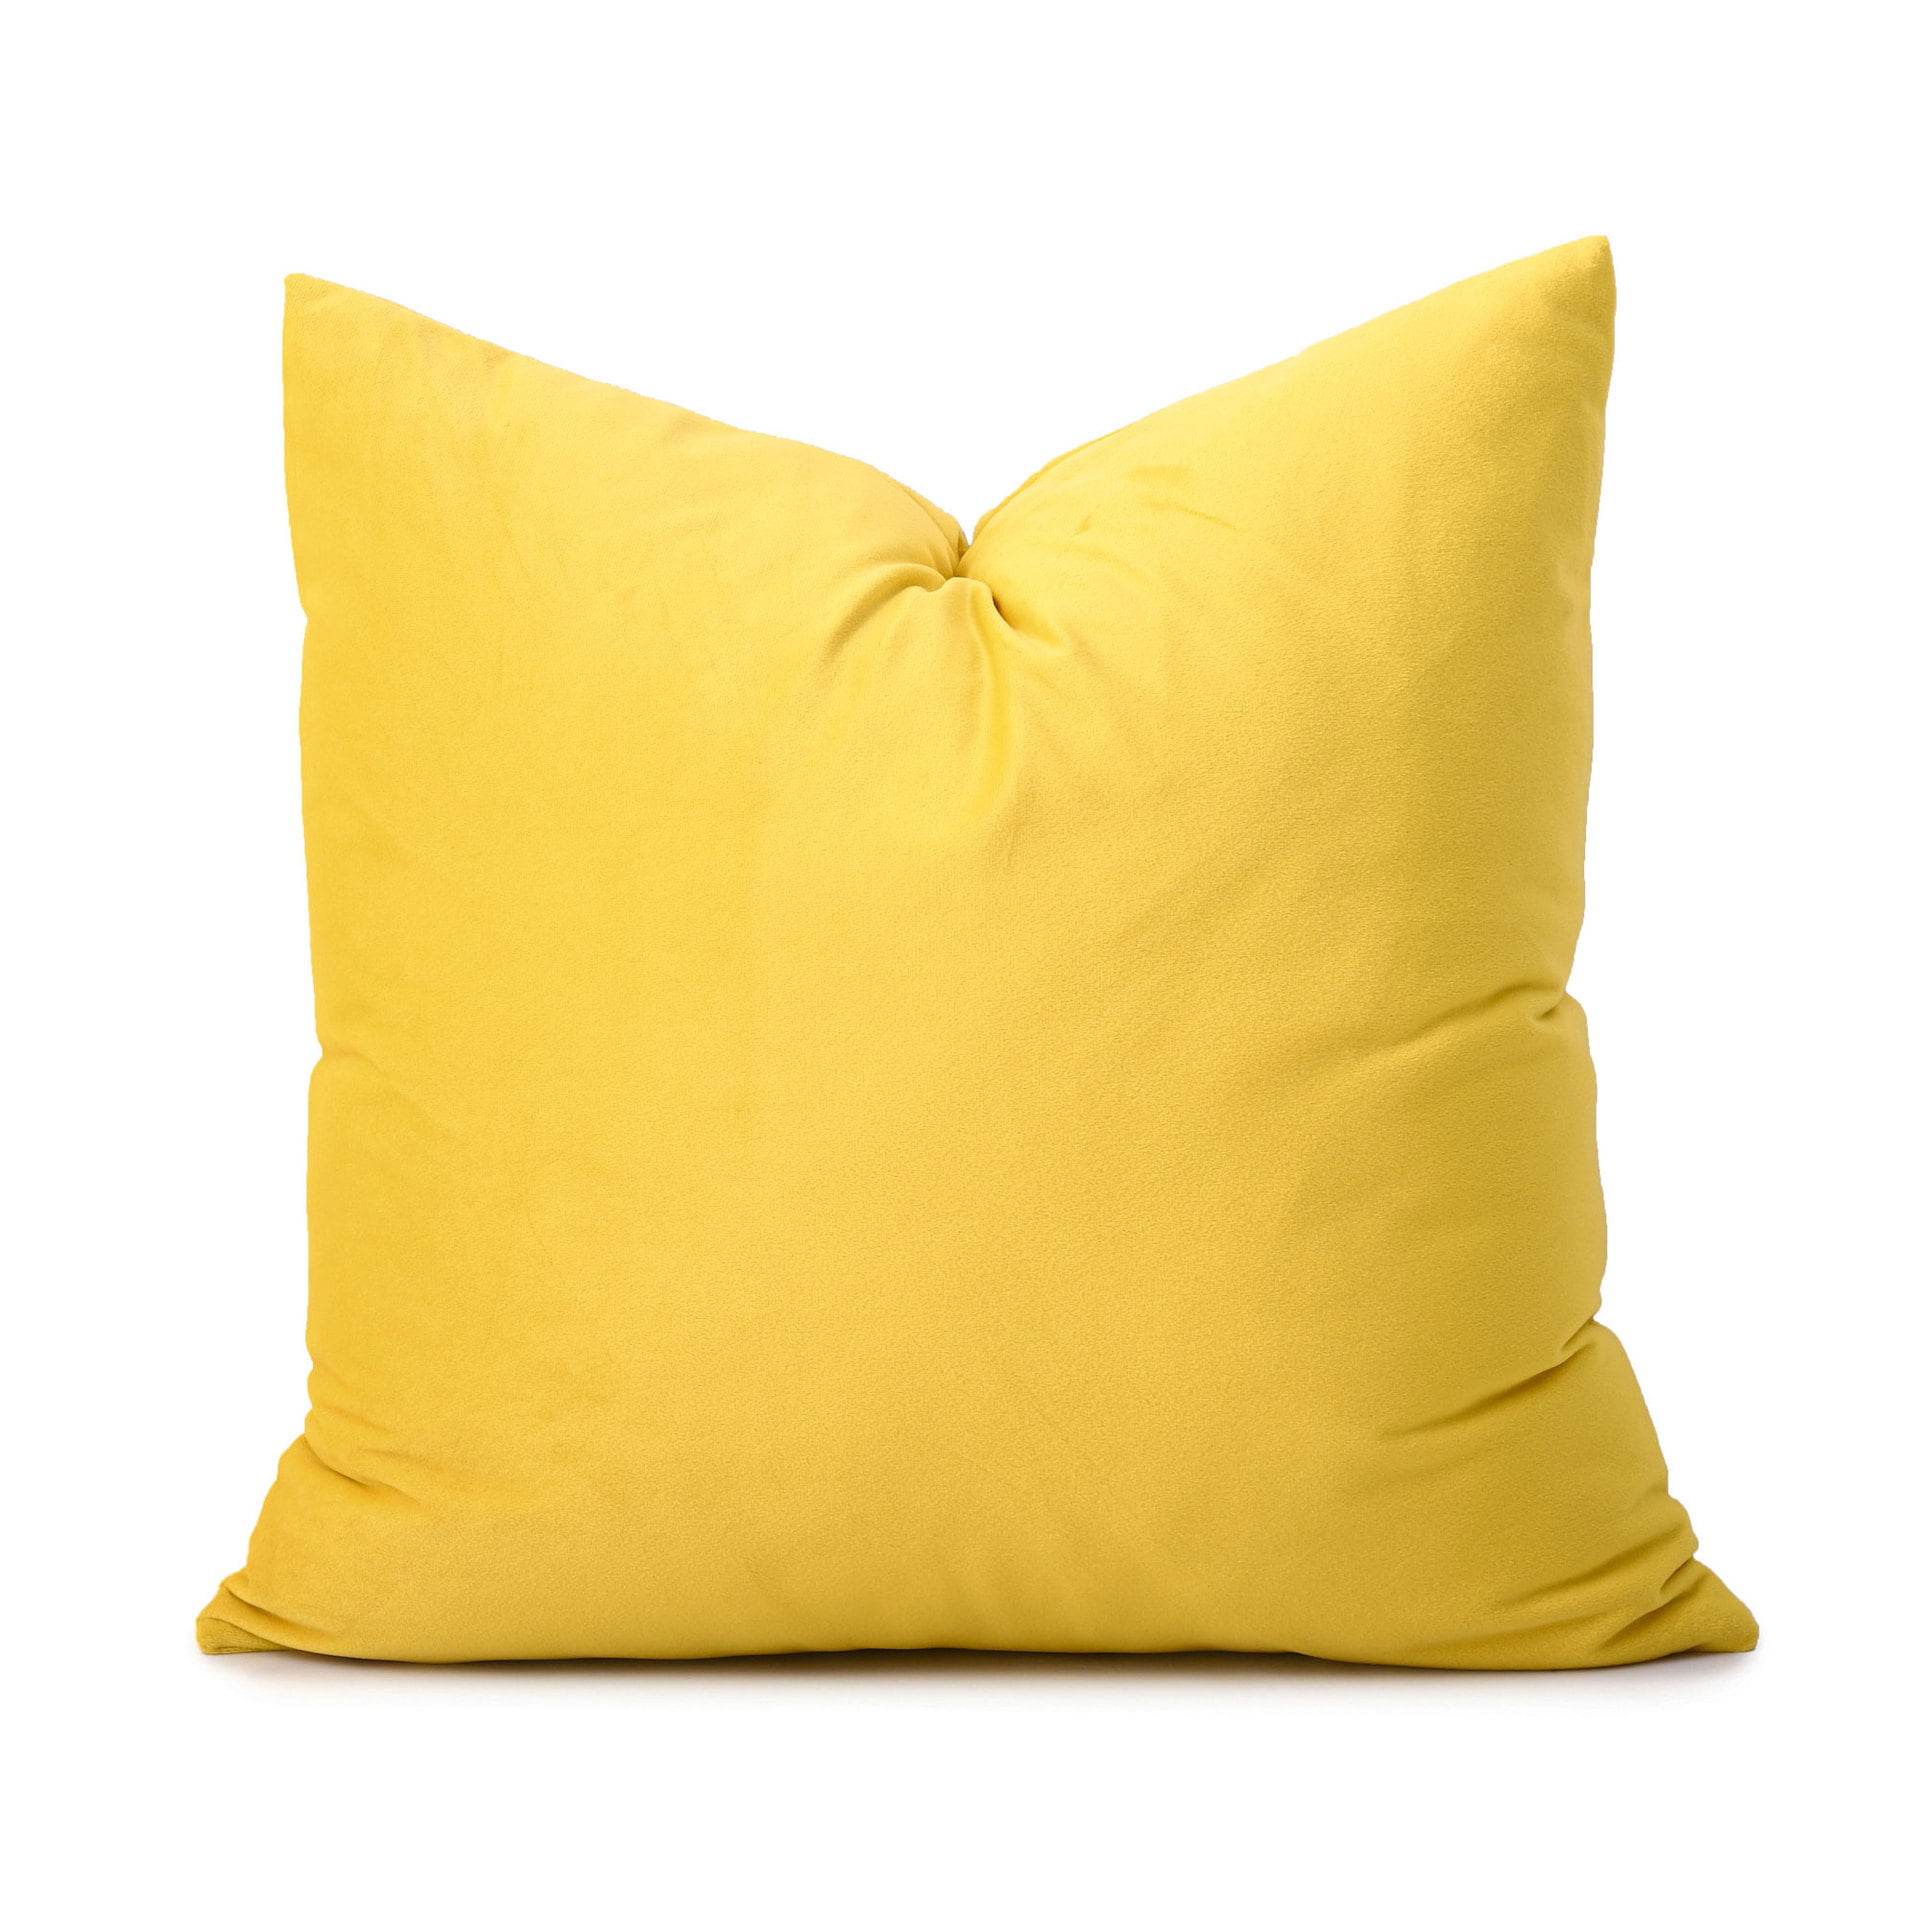 CARRIE HOME Mustard Yellow Velvet Throw Pillow Covers 18 x 18 Yellow Couch  Throw Pillows 18x18 Set of 2 Super Soft Yellow Accent Decorative Pillows